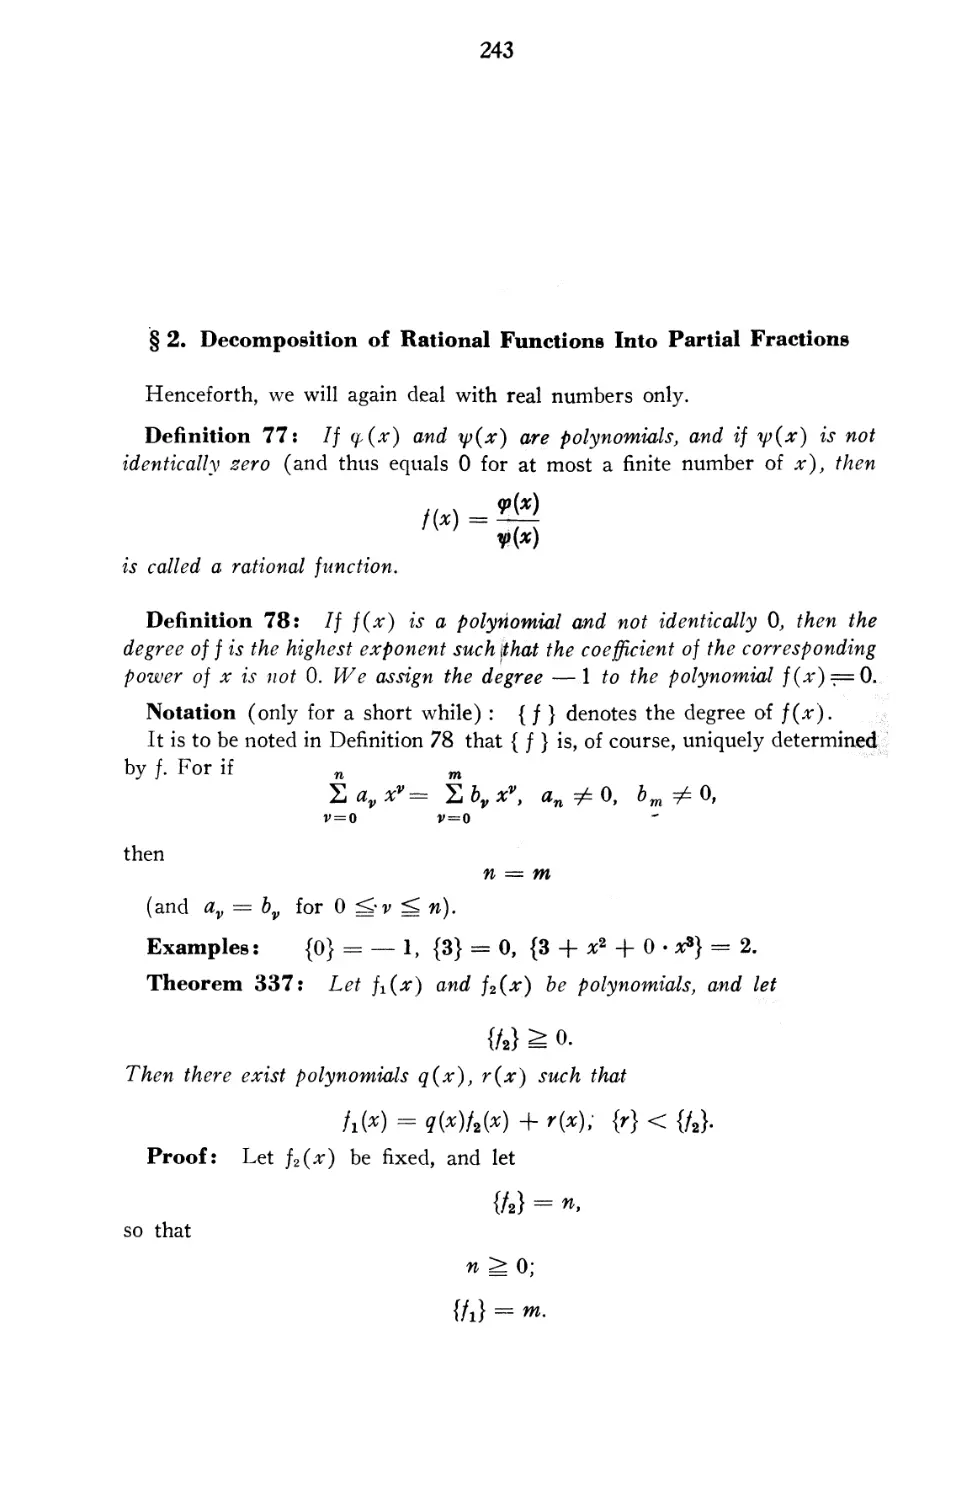 § 2. Decomposition of Rational Functions into Partial Fractions